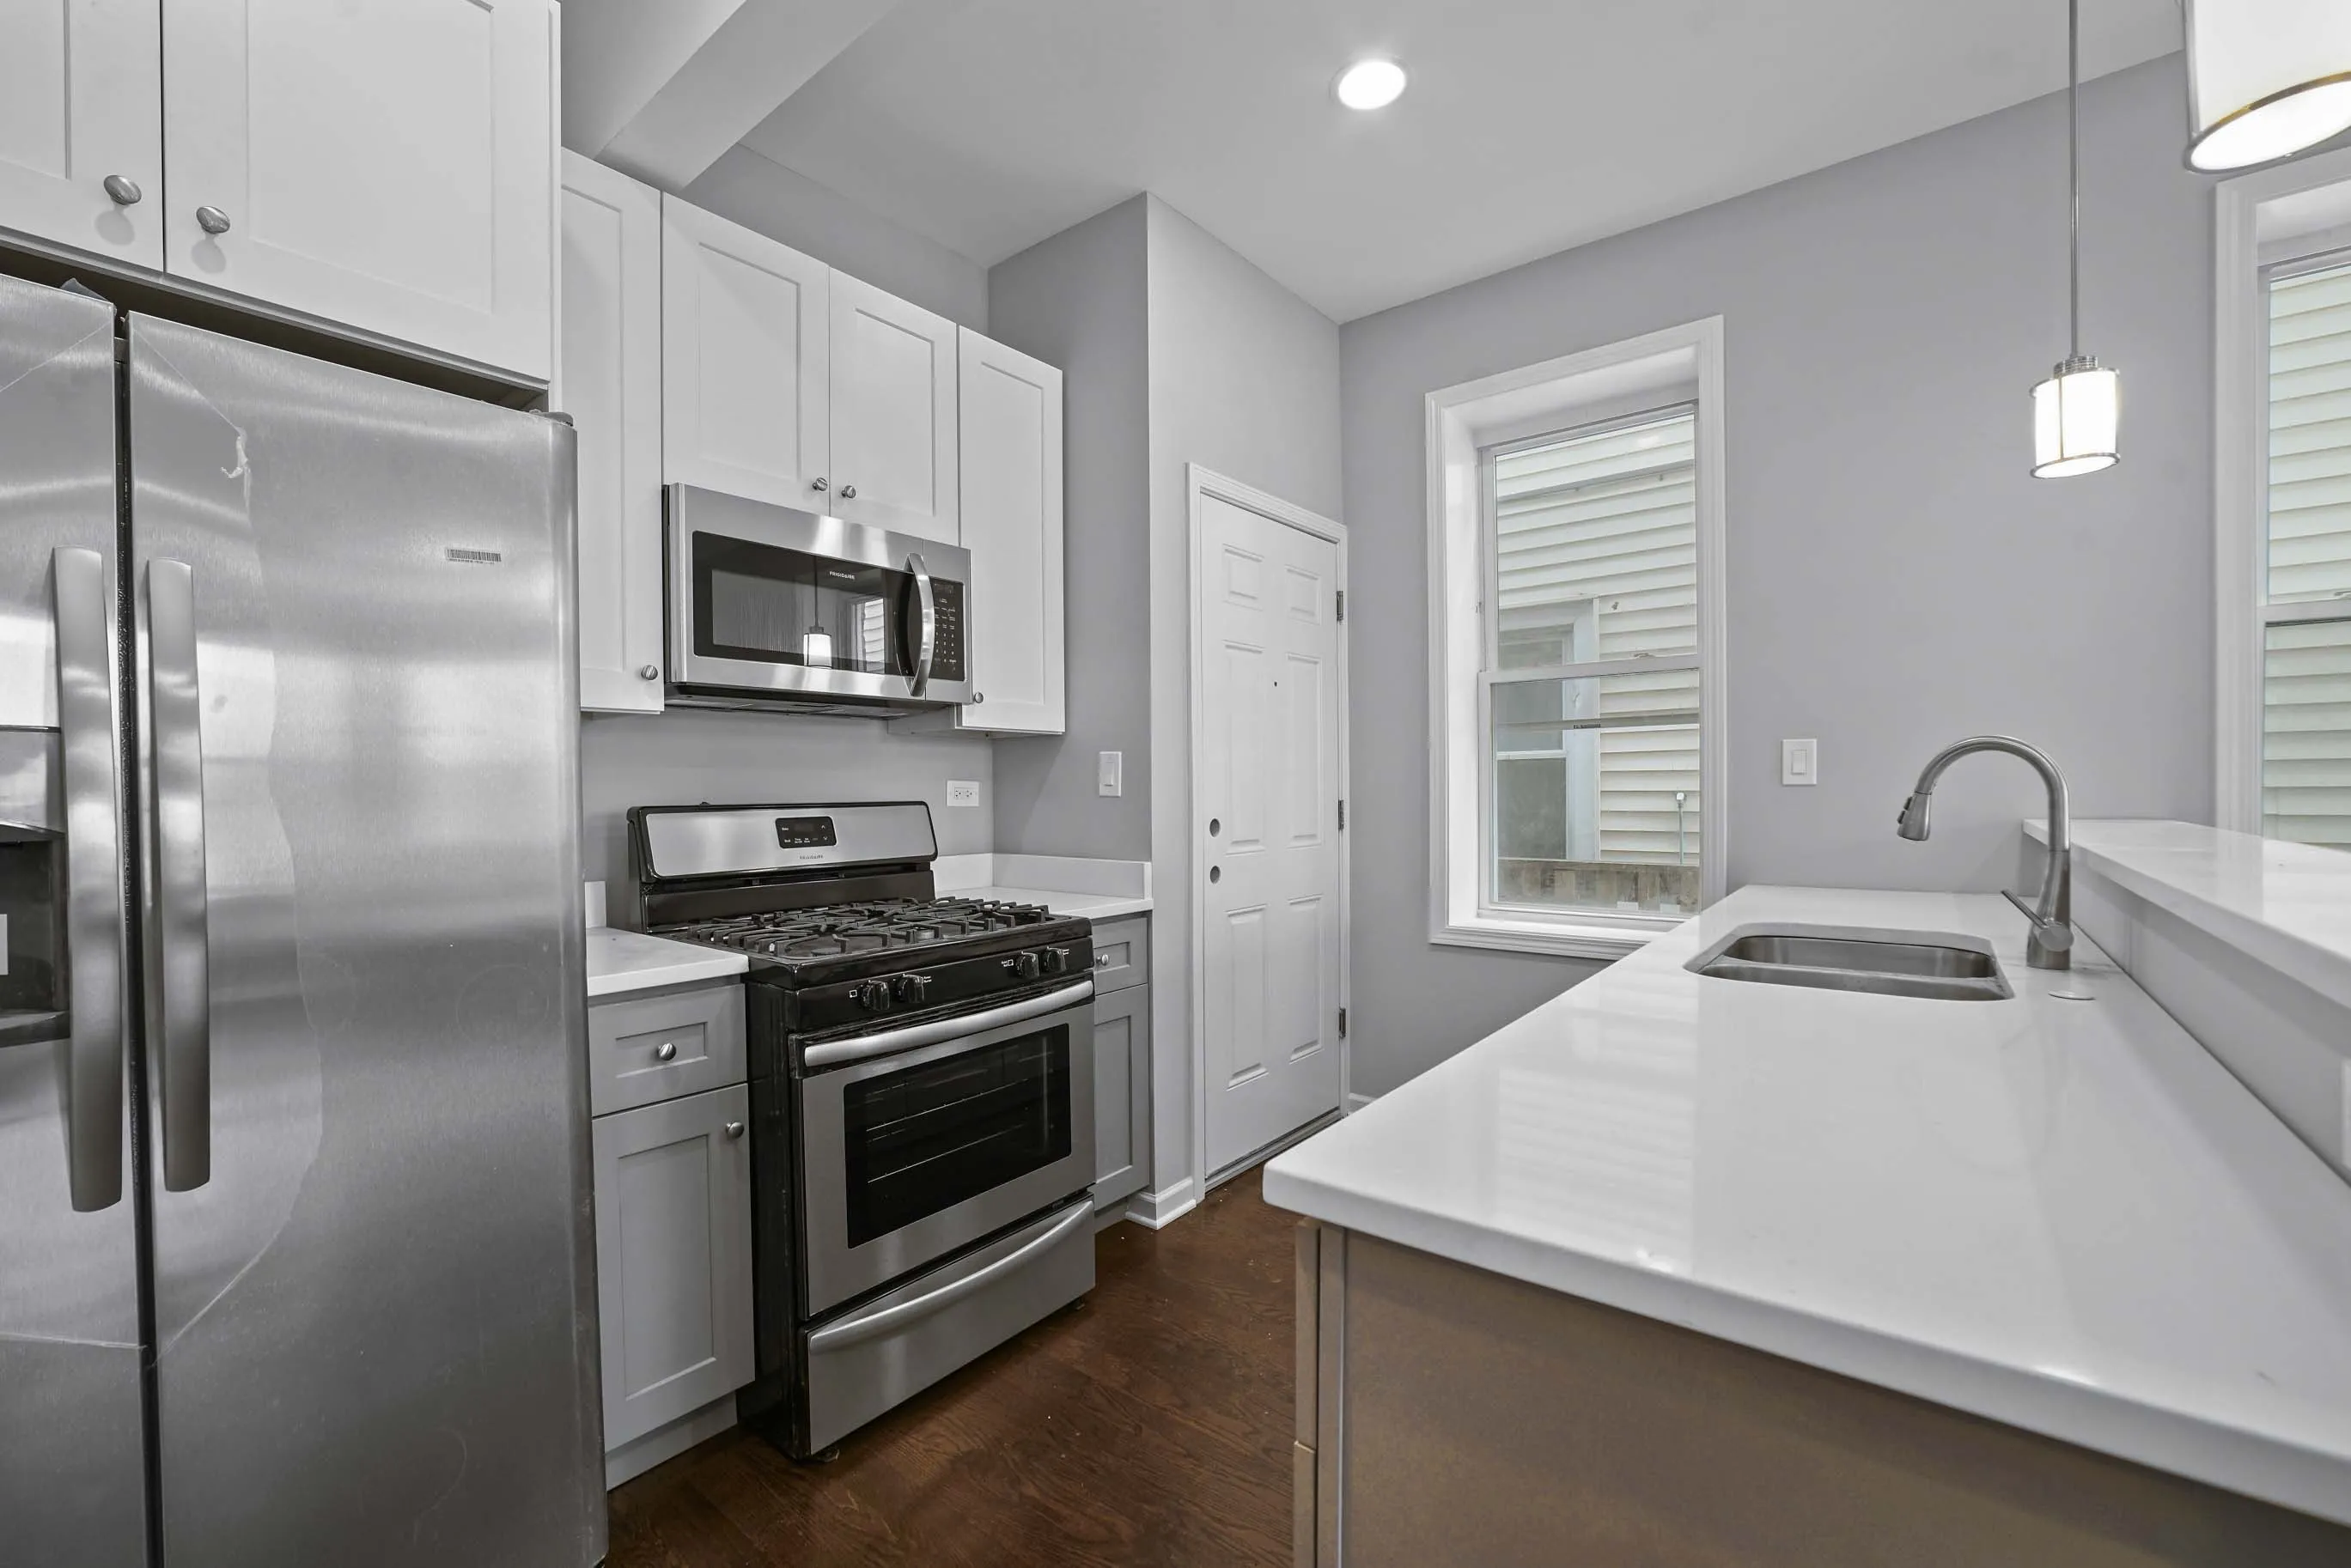 2 Bedroom unit kitchen model at 1603 South Wood Apartments